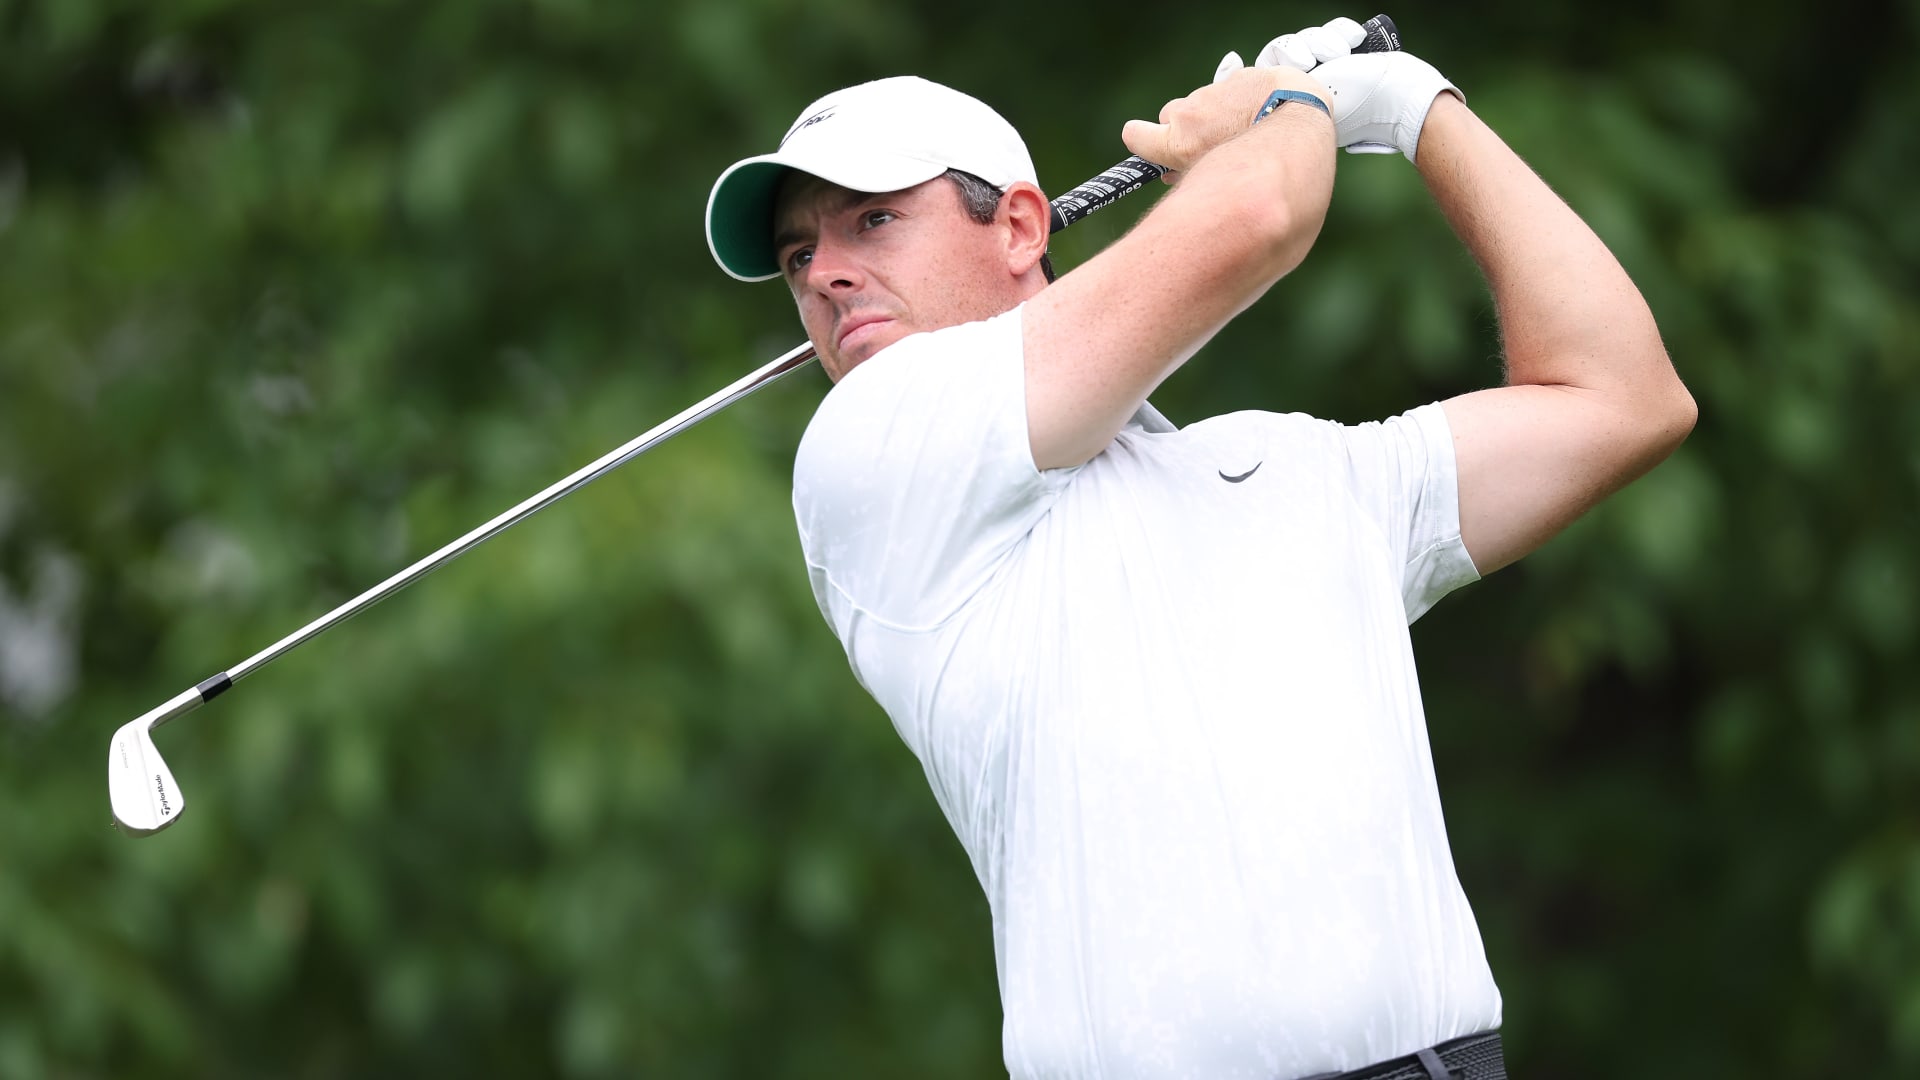 Rory McIlroy of Northern Ireland plays his shot from the 14th tee during the continuation of the first round of The Memorial Tournament at Muirfield Village Golf Club on June 04, 2021 in Dublin, Ohio.